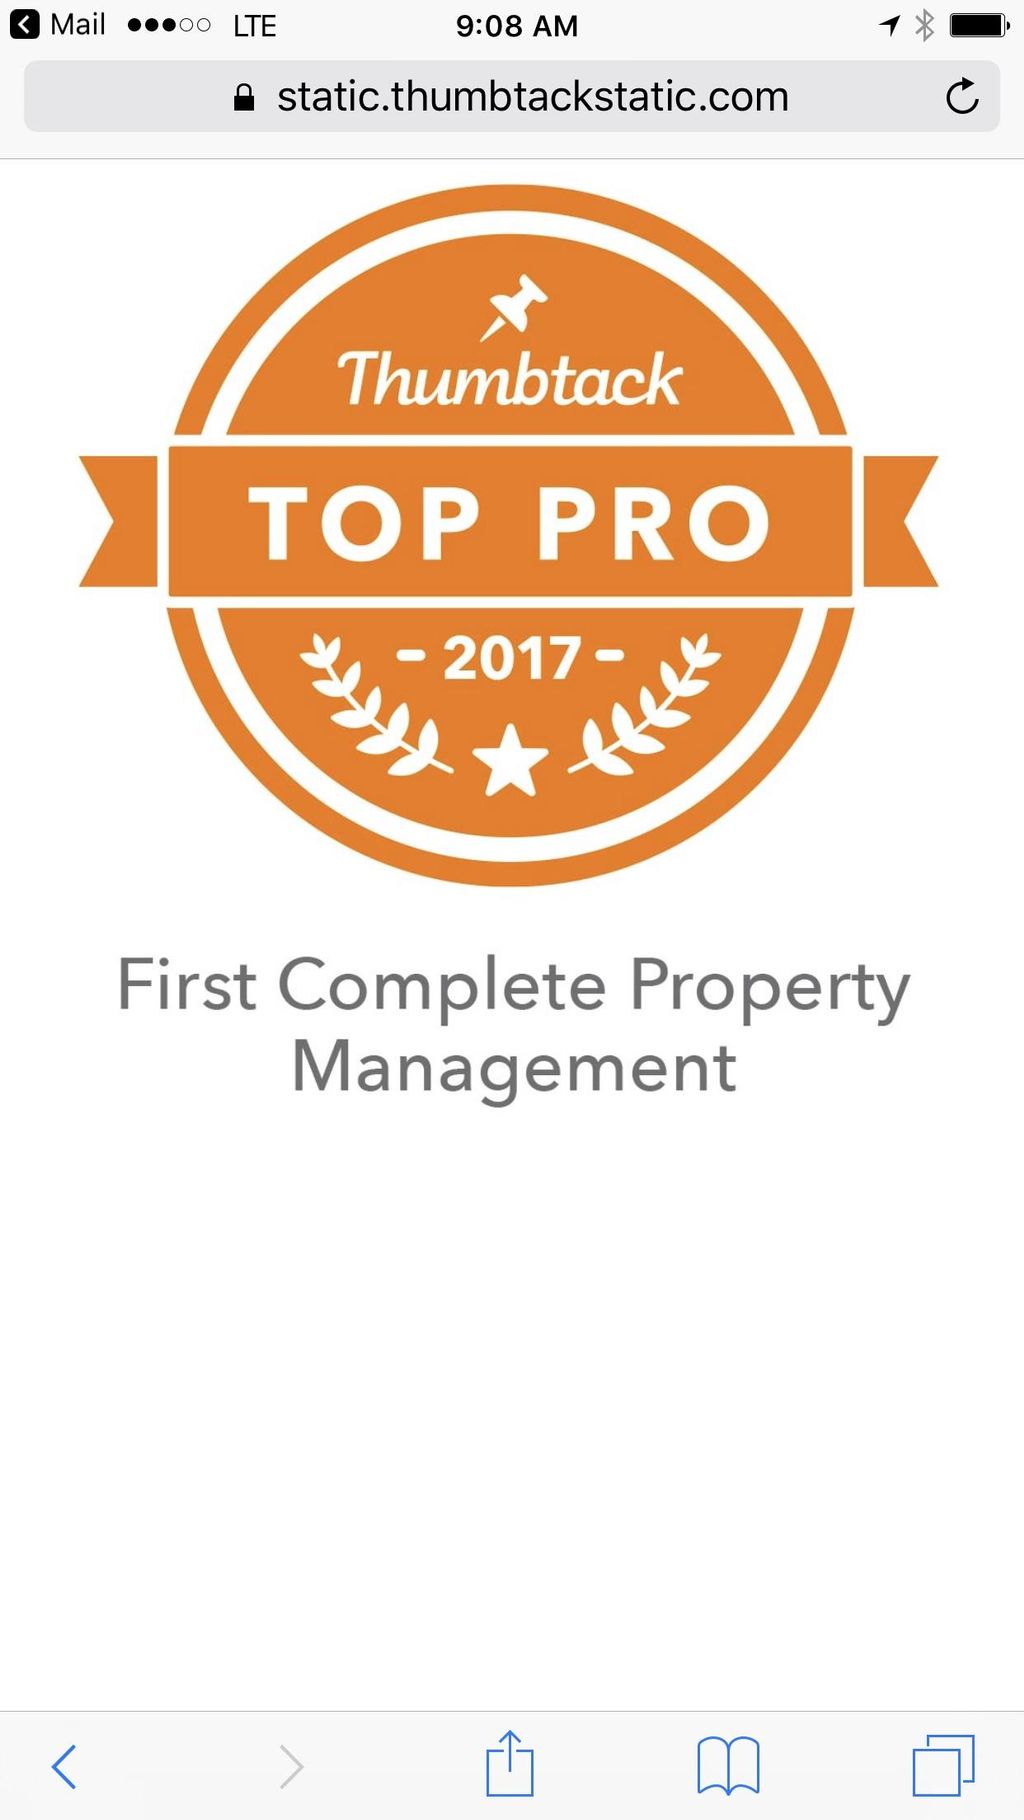 First Complete Property Management